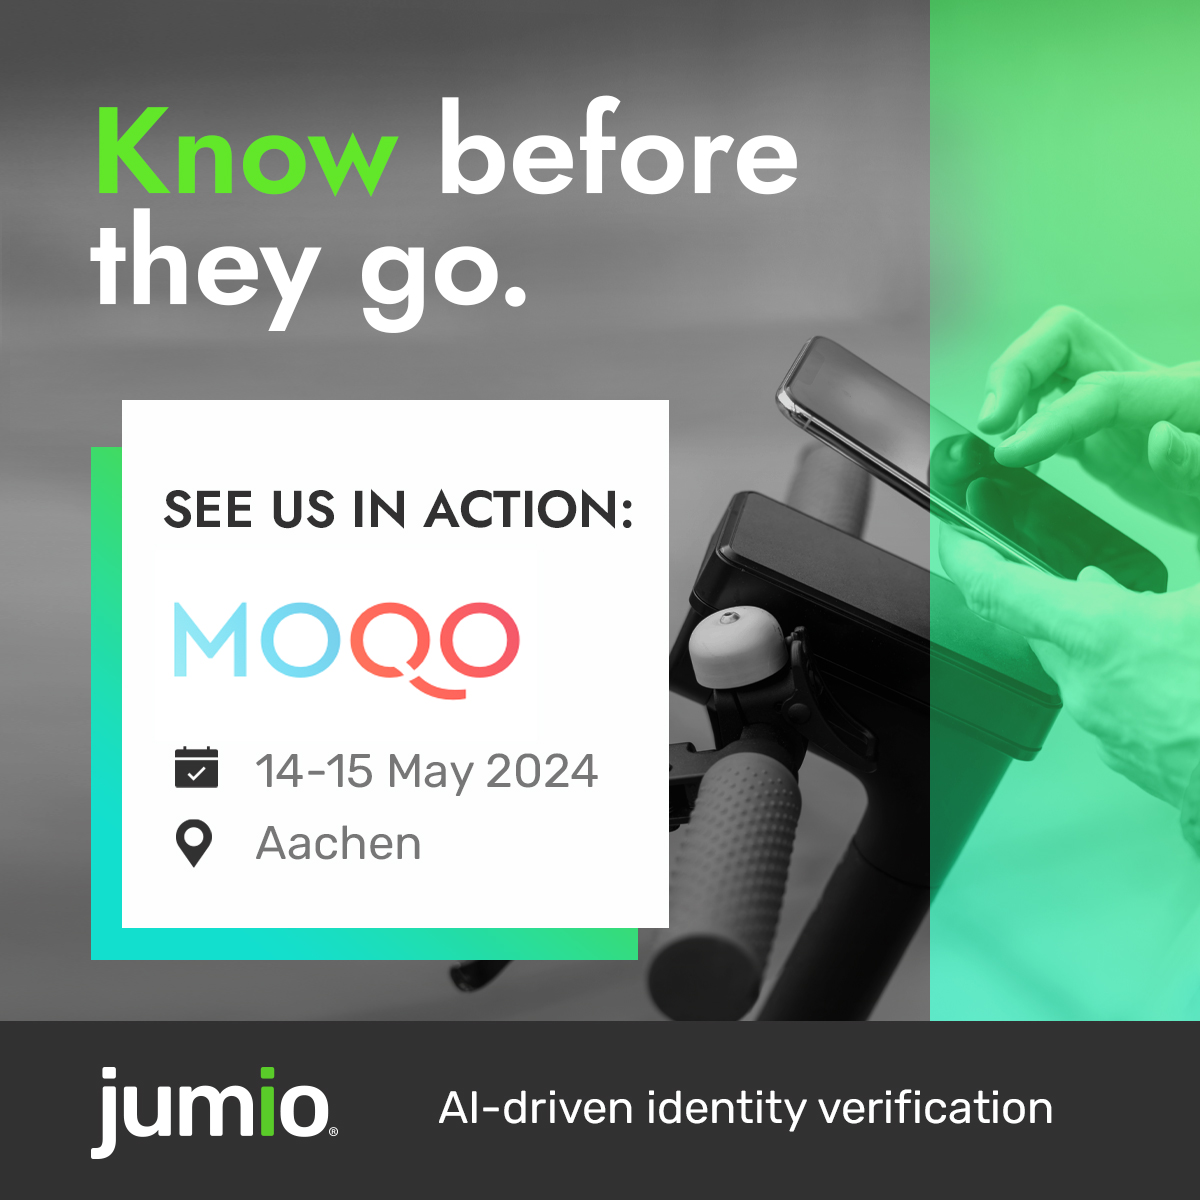 While mobility service providers want to protect their fleets, they also need to provide a seamless digital user experience that makes sign-up and ongoing usage quick and easy. Visit us at #MOQOSummit2024 to learn more: moqo.de/summit